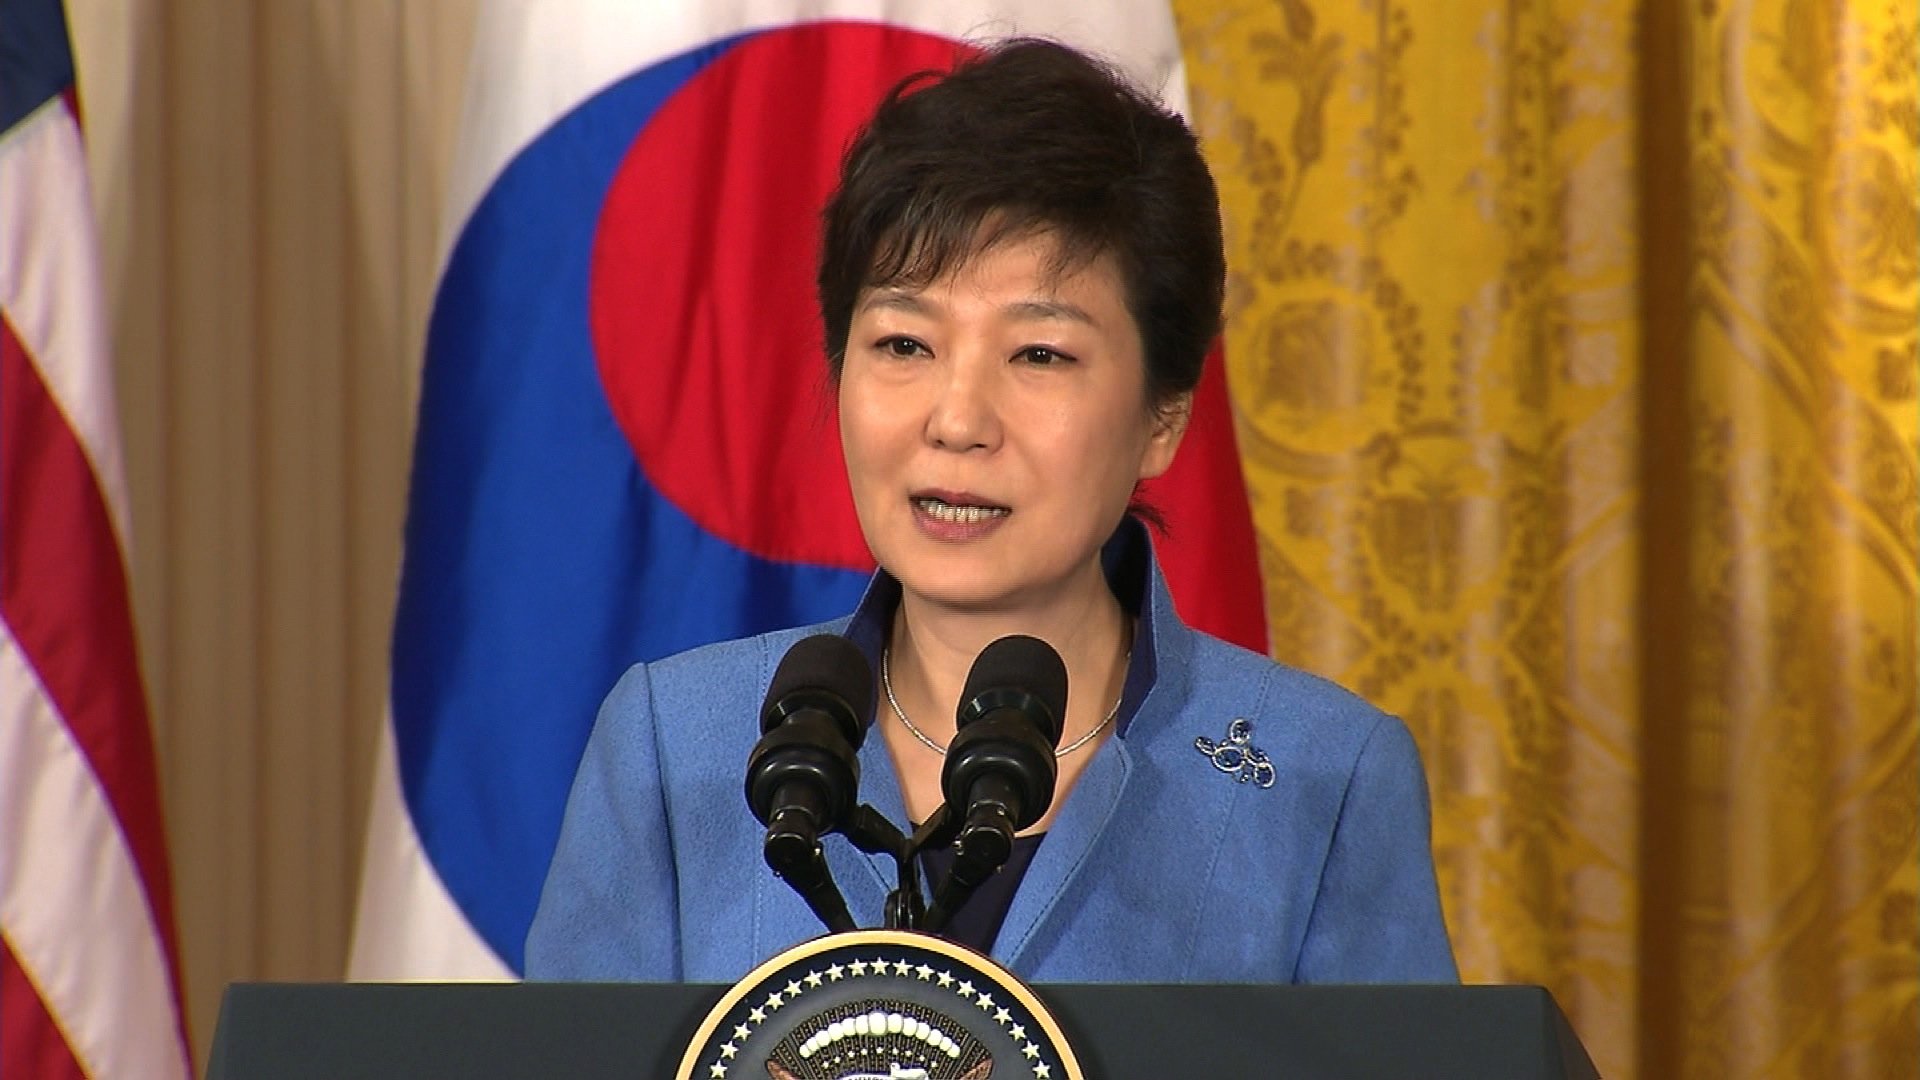 Opposition parties demand South Korean President Park Geun-Hye's impeachment, Park willing for an early resignation